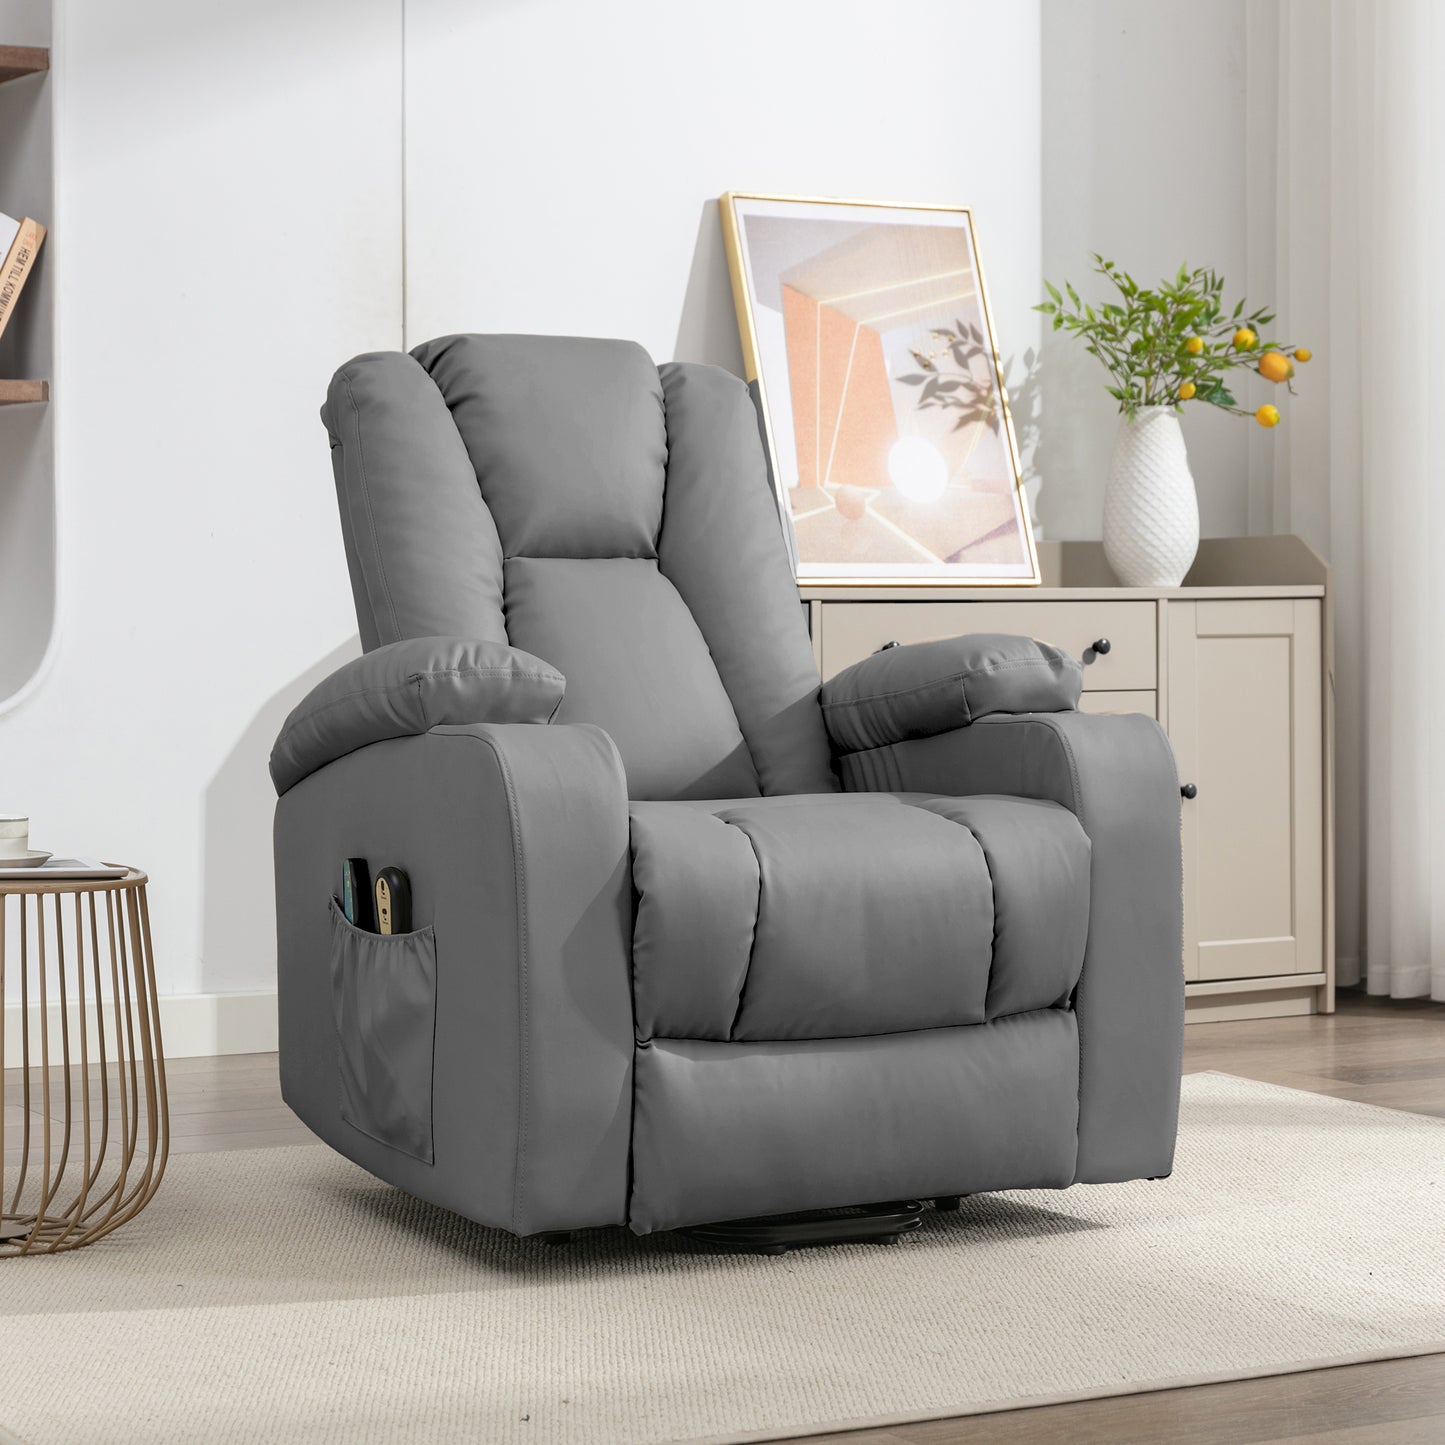 Saxham electric riser recliner with massage and heat